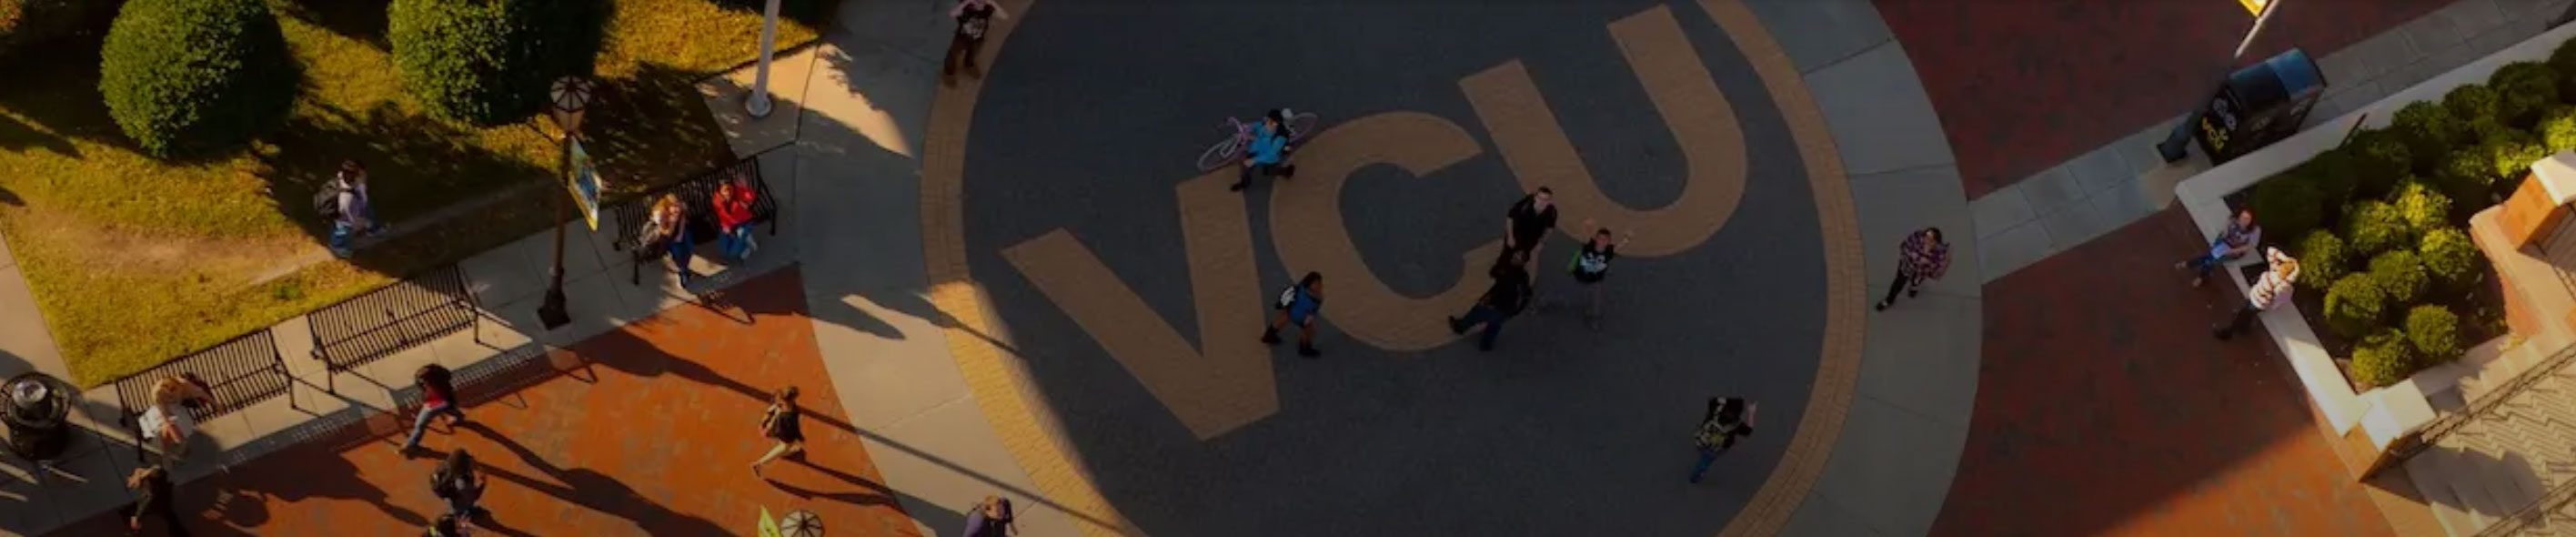 VCU letters painted on ground